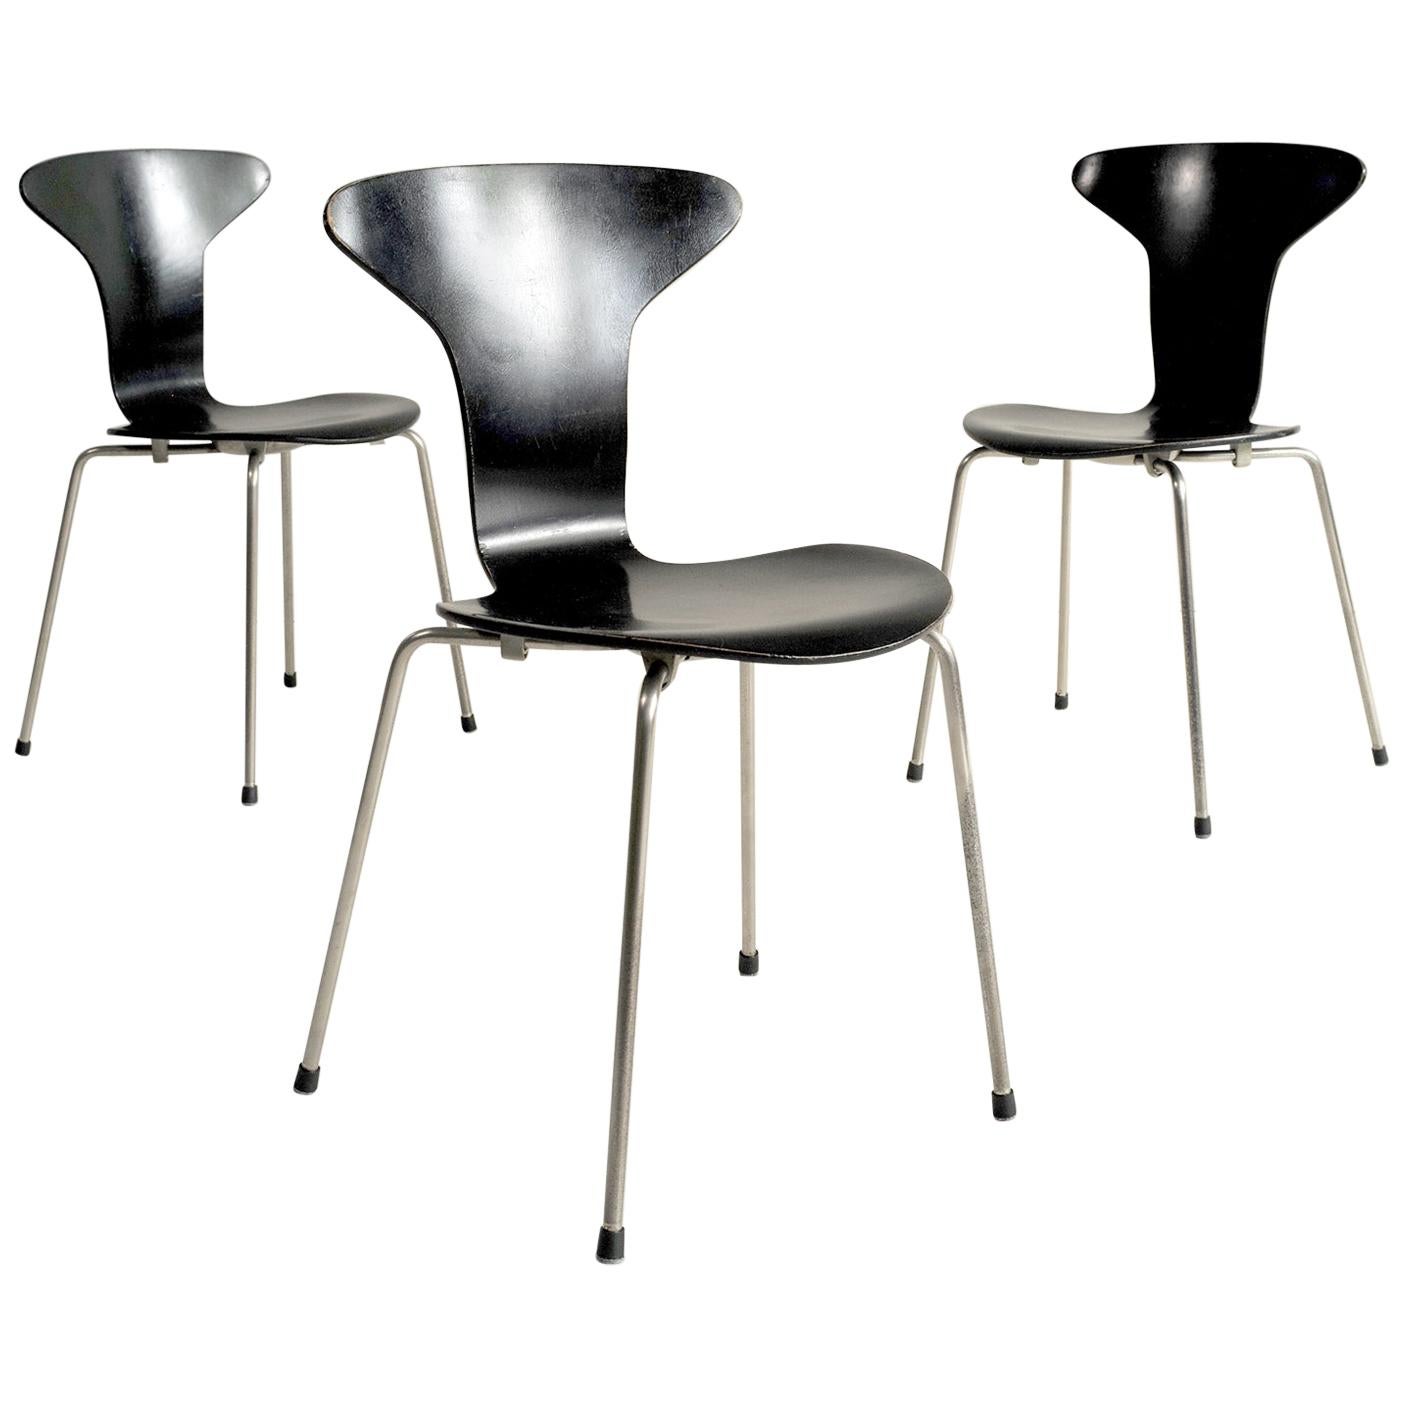 Arne Jacobsen, Set of 3 Chairs "3105", First Edition, Denmark, 1955